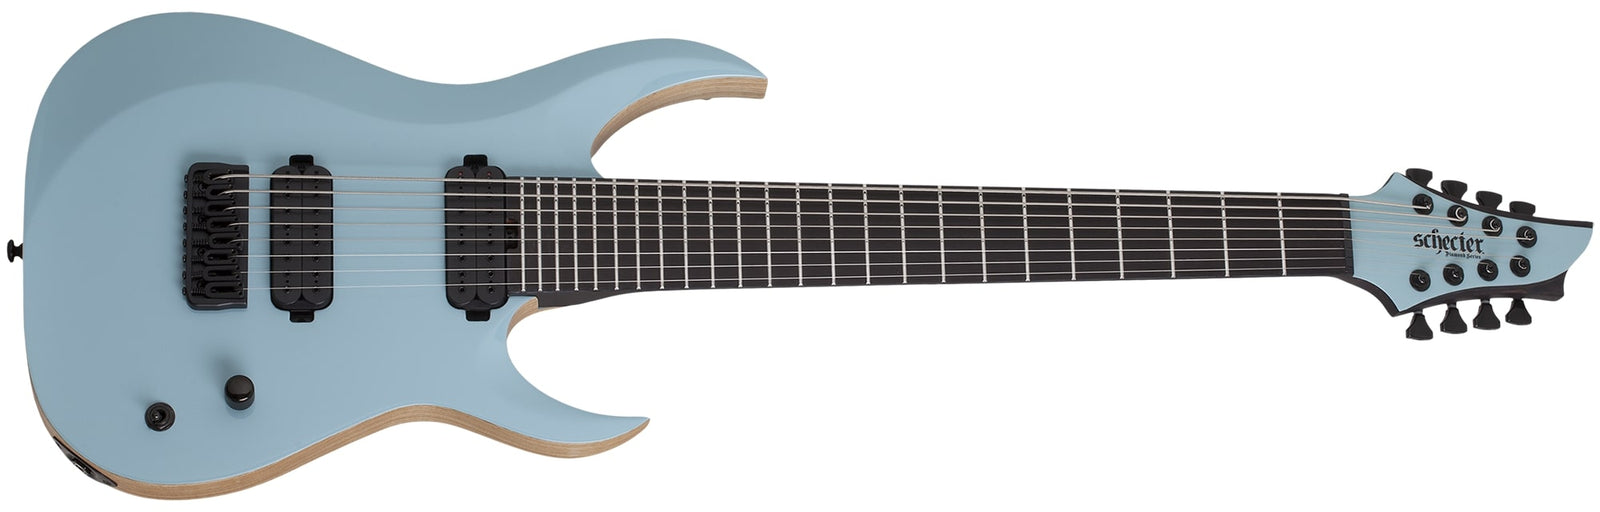 8-String Electric Guitars - The Guitar World